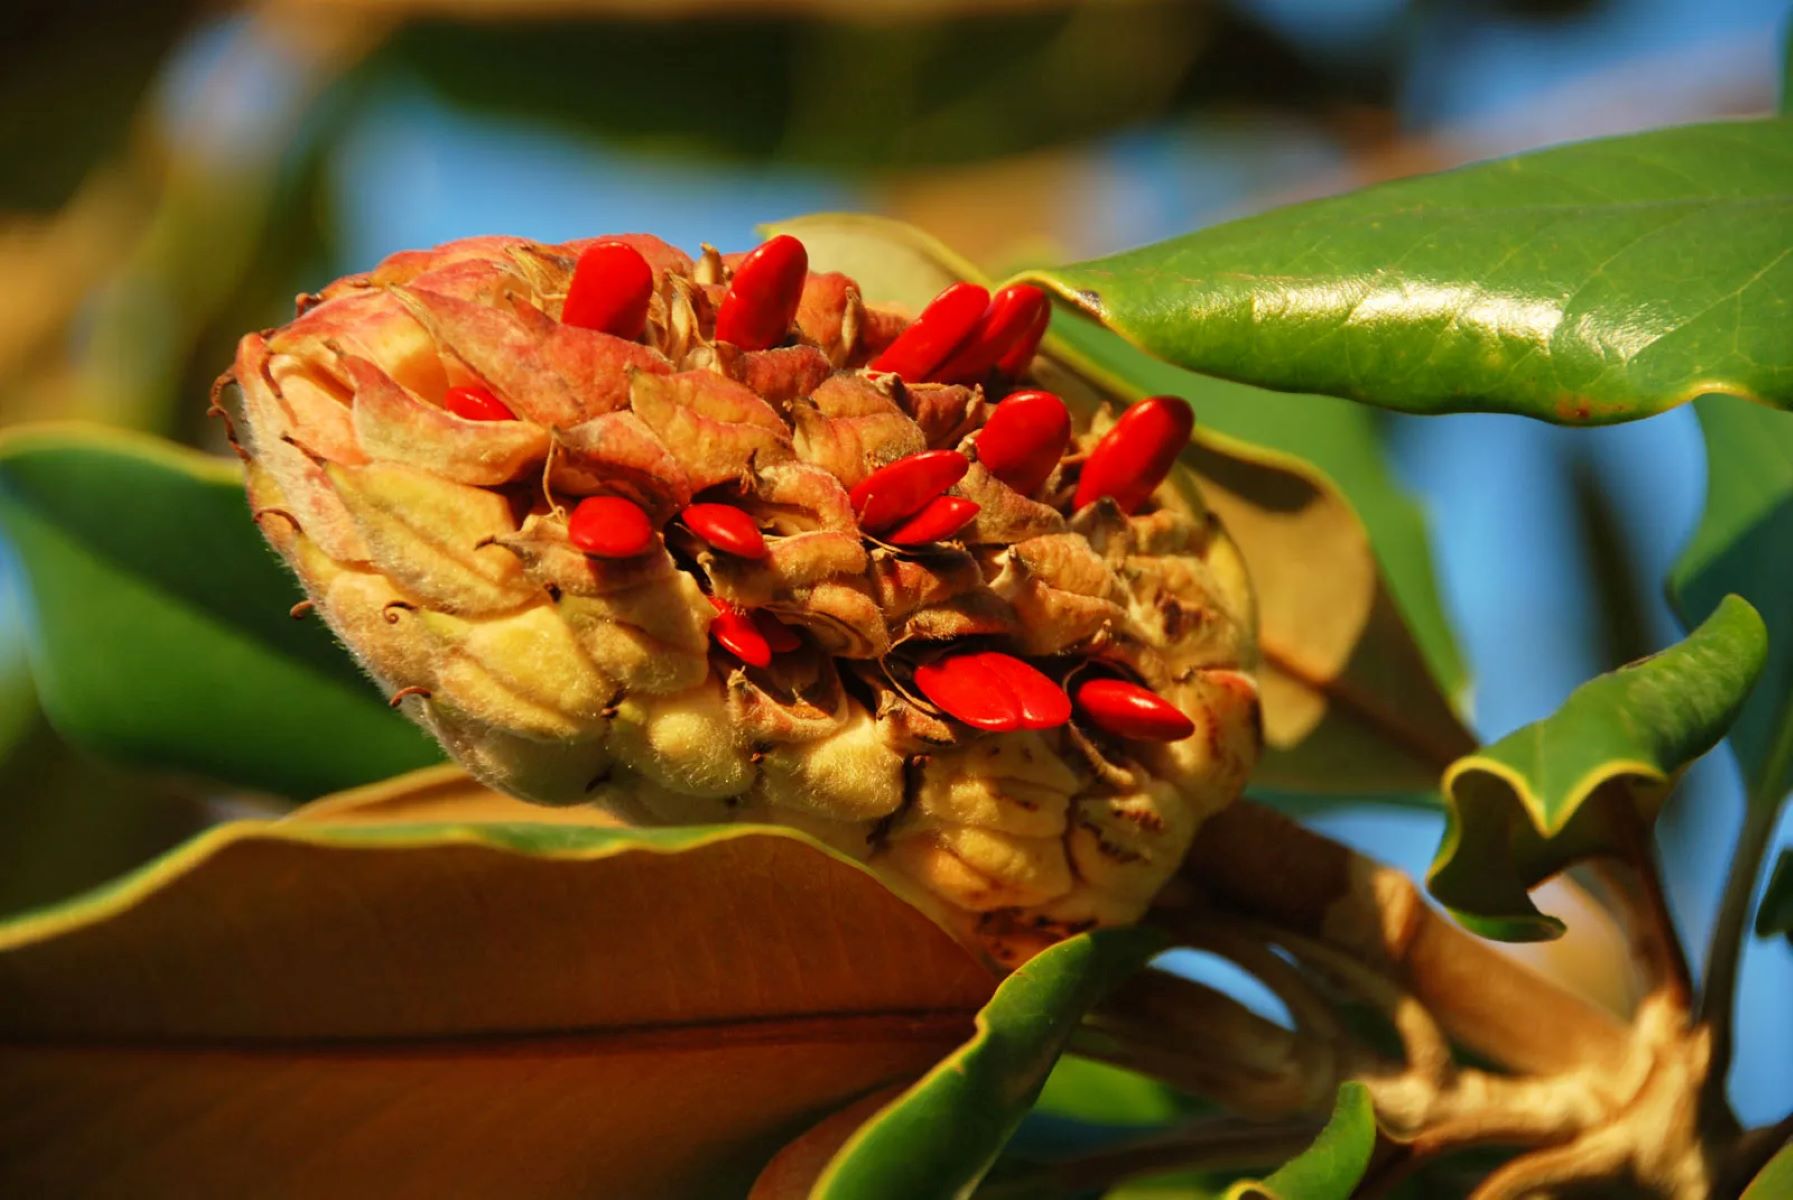 What Is The Purpose Of The Enclosed Seeds In A Fruit Found On A Flowering Plant?